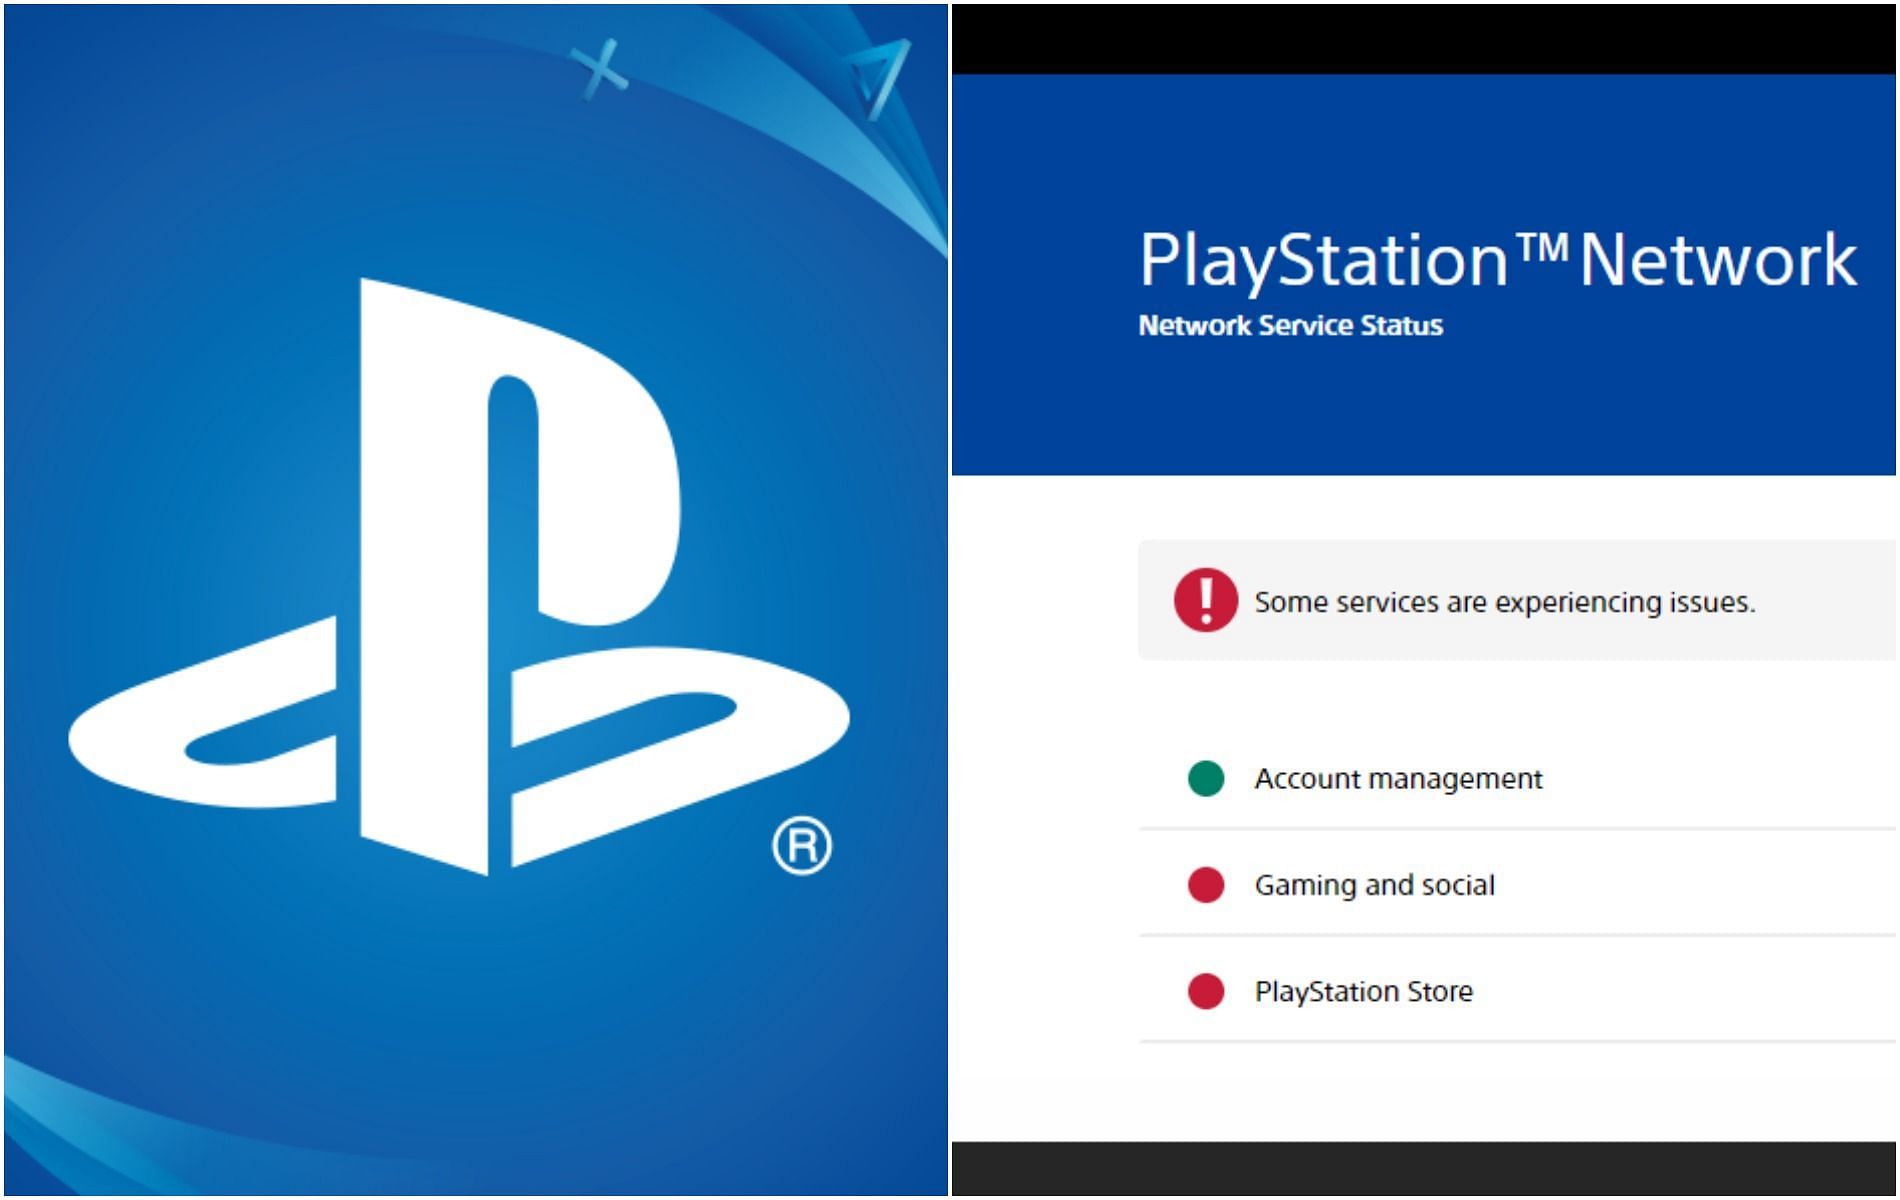 PlayStation Network currently experiencing issues